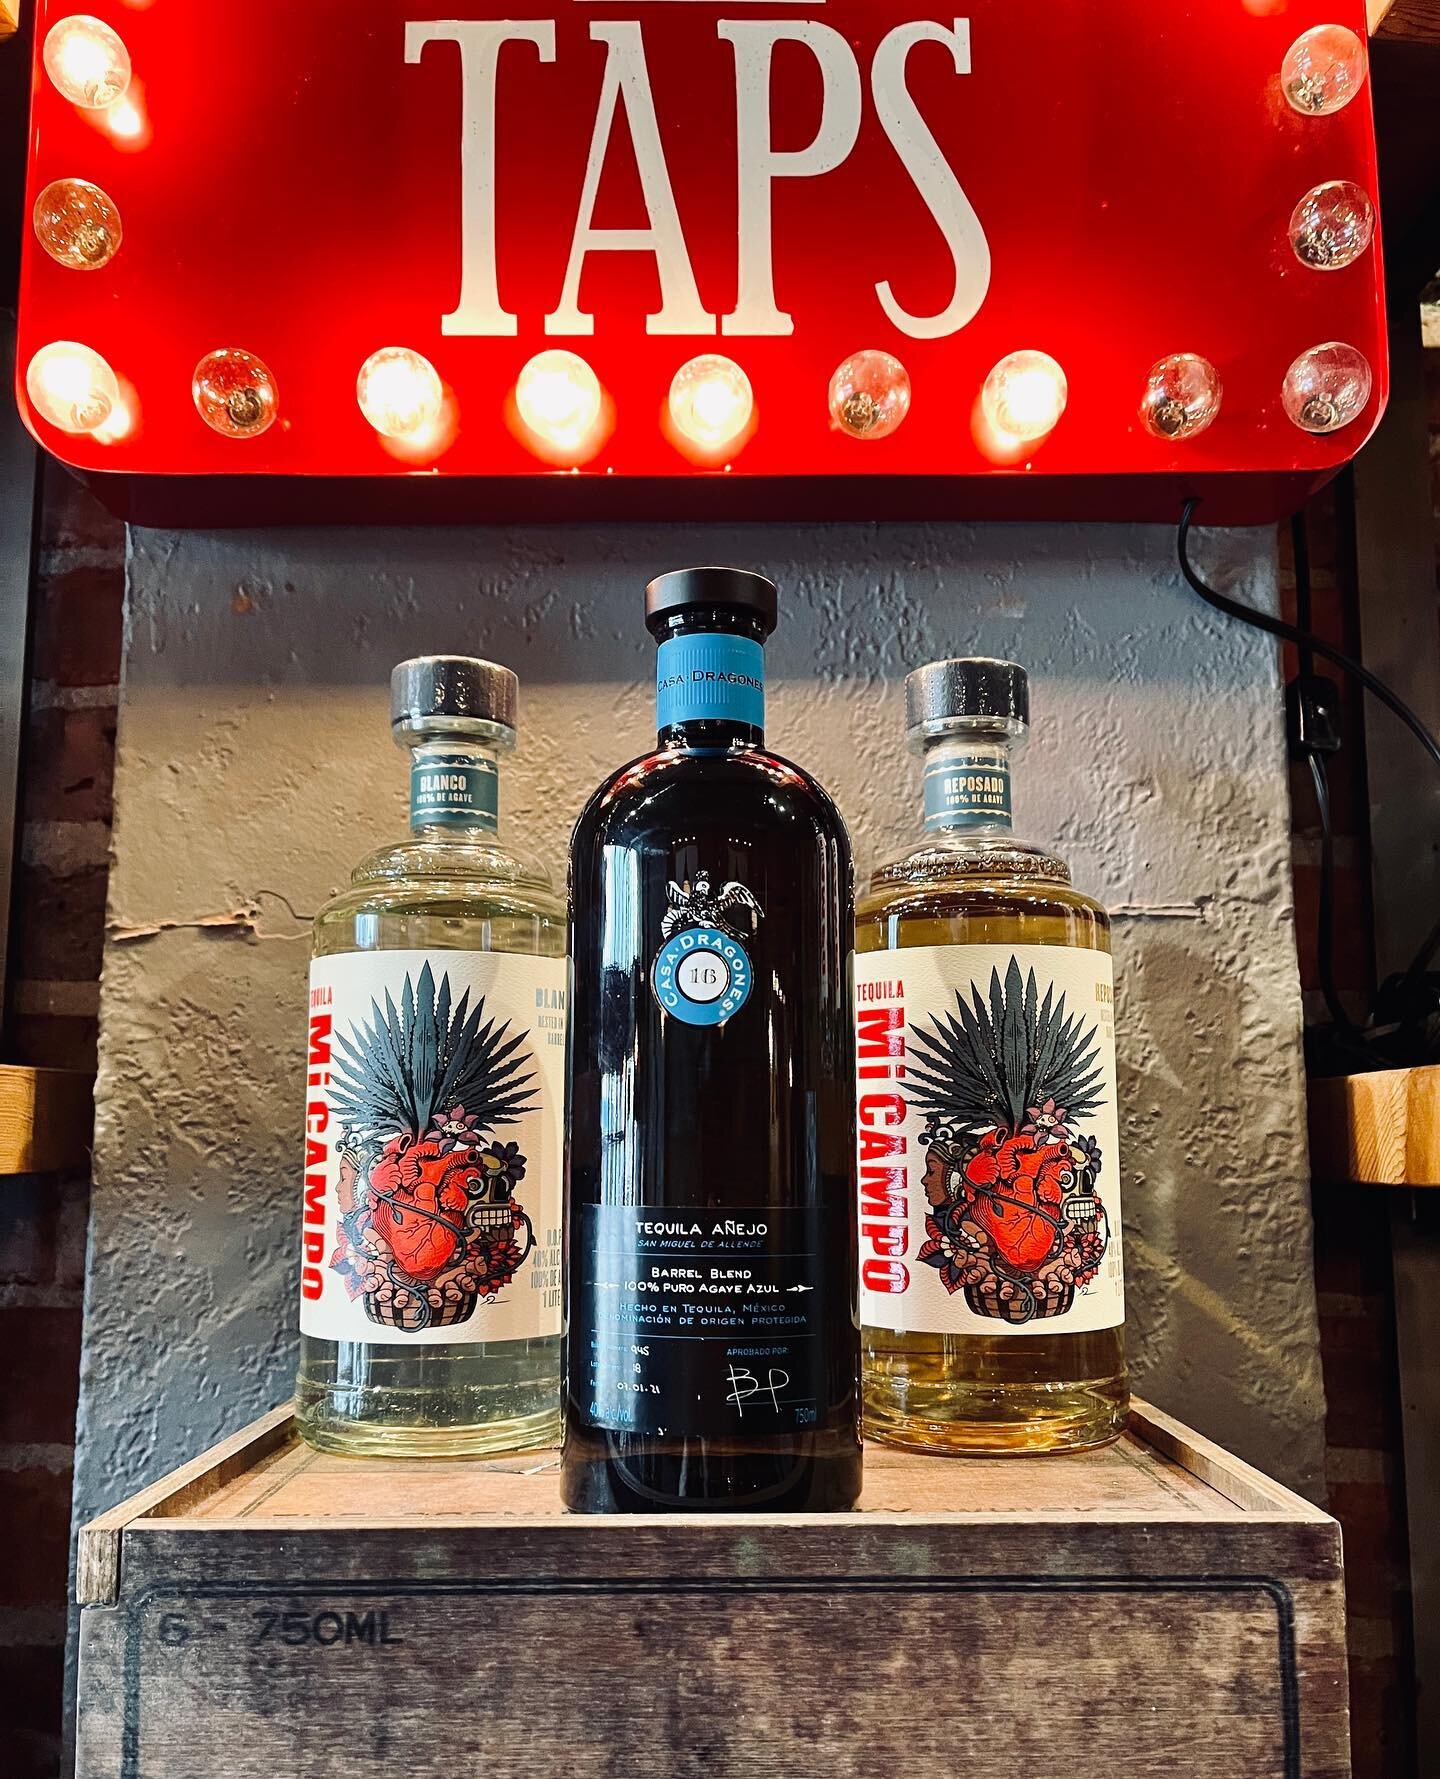 🙌🏼NEW BREAKEVEN BOTTLE🙌🏼

We are so excited to pour this incredible tequila! Please meet:
La Case de Dragones Tequila A&ntilde;ejo Barrel Blended  @casadragones! This 
Incredible brand is owned and operated by Mexico&rsquo;s first female Maestra 